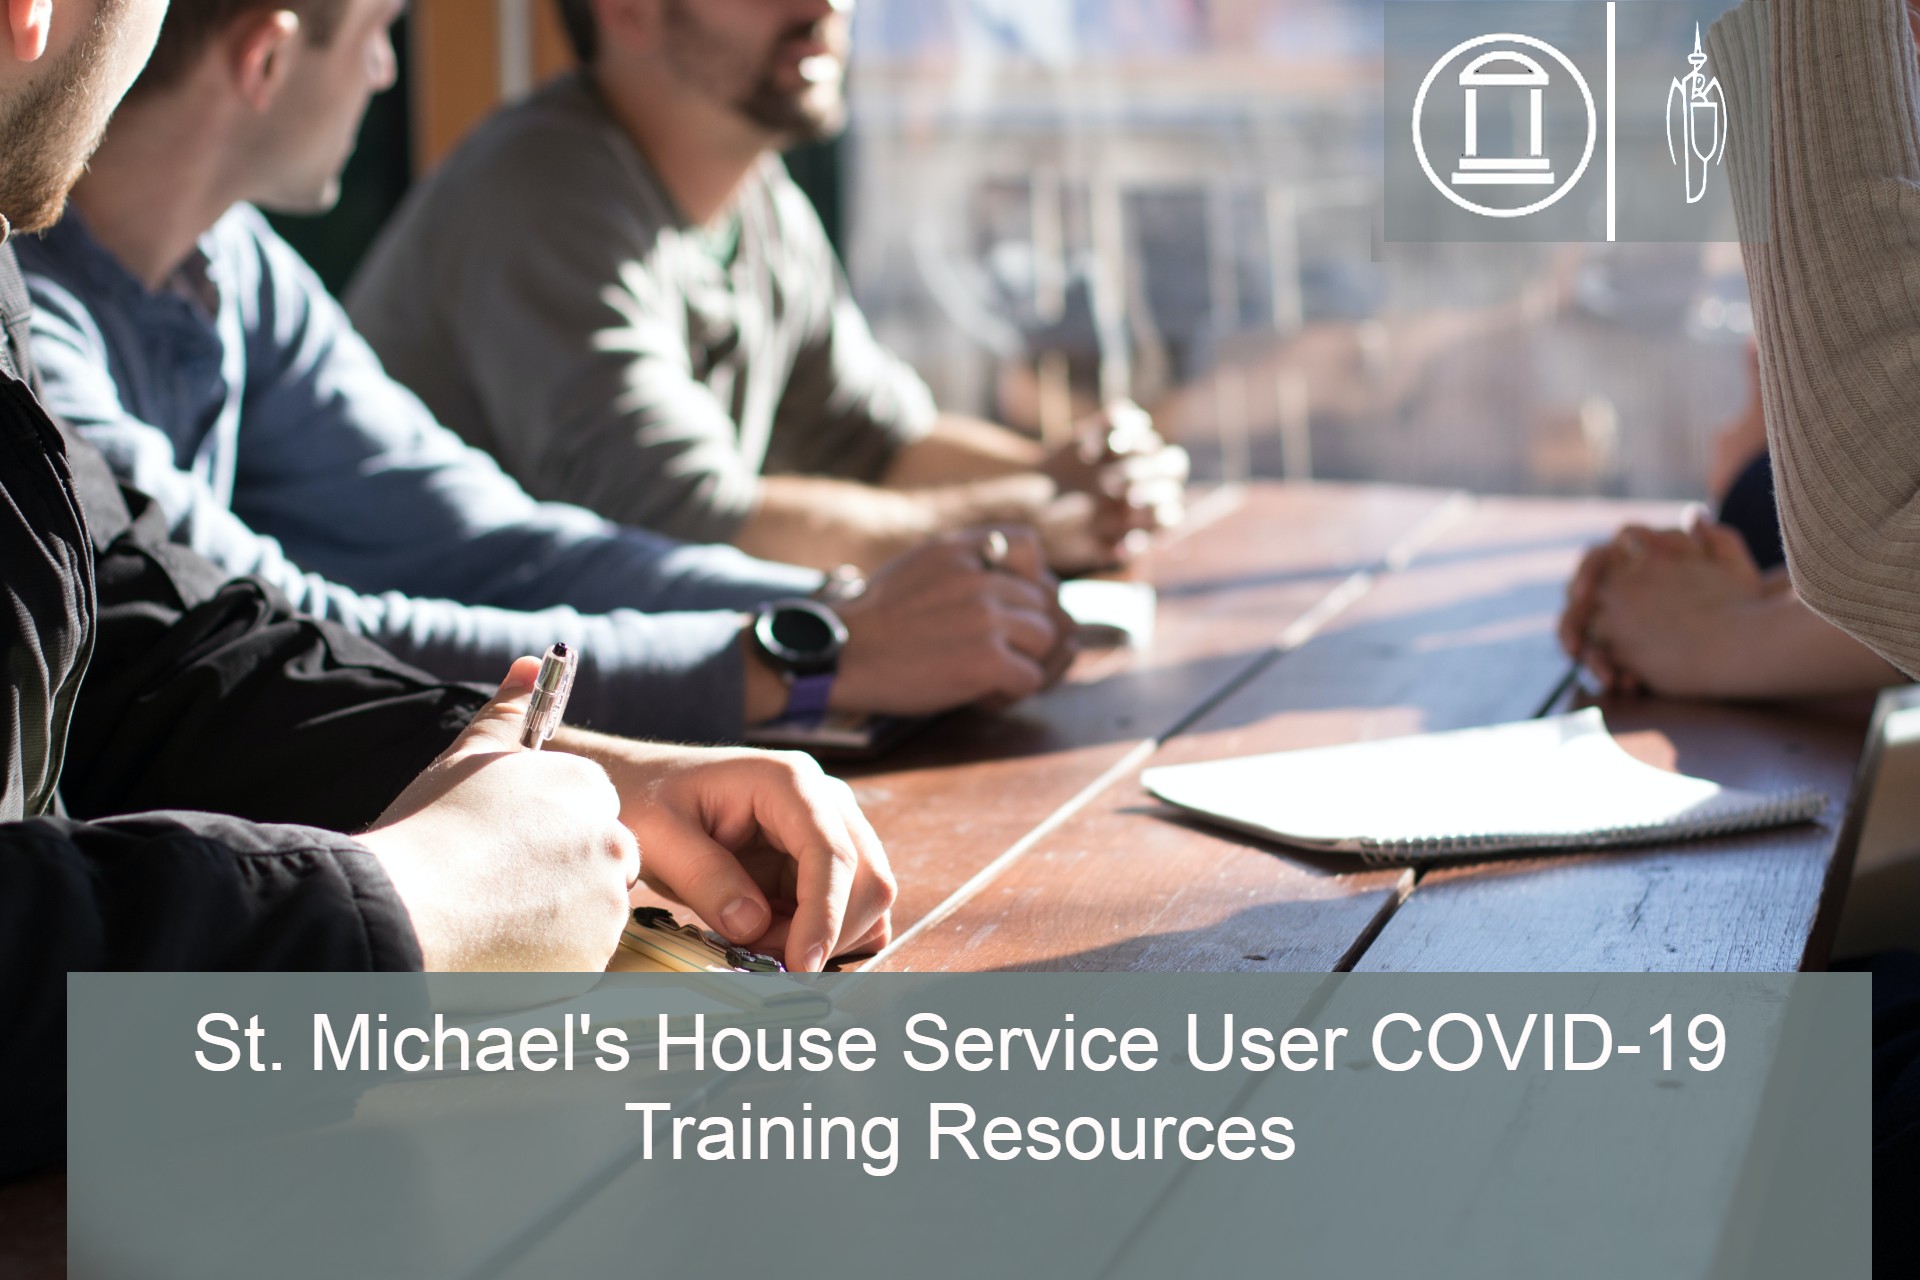 St. Michael's House Service User COVID-19 Training Resources